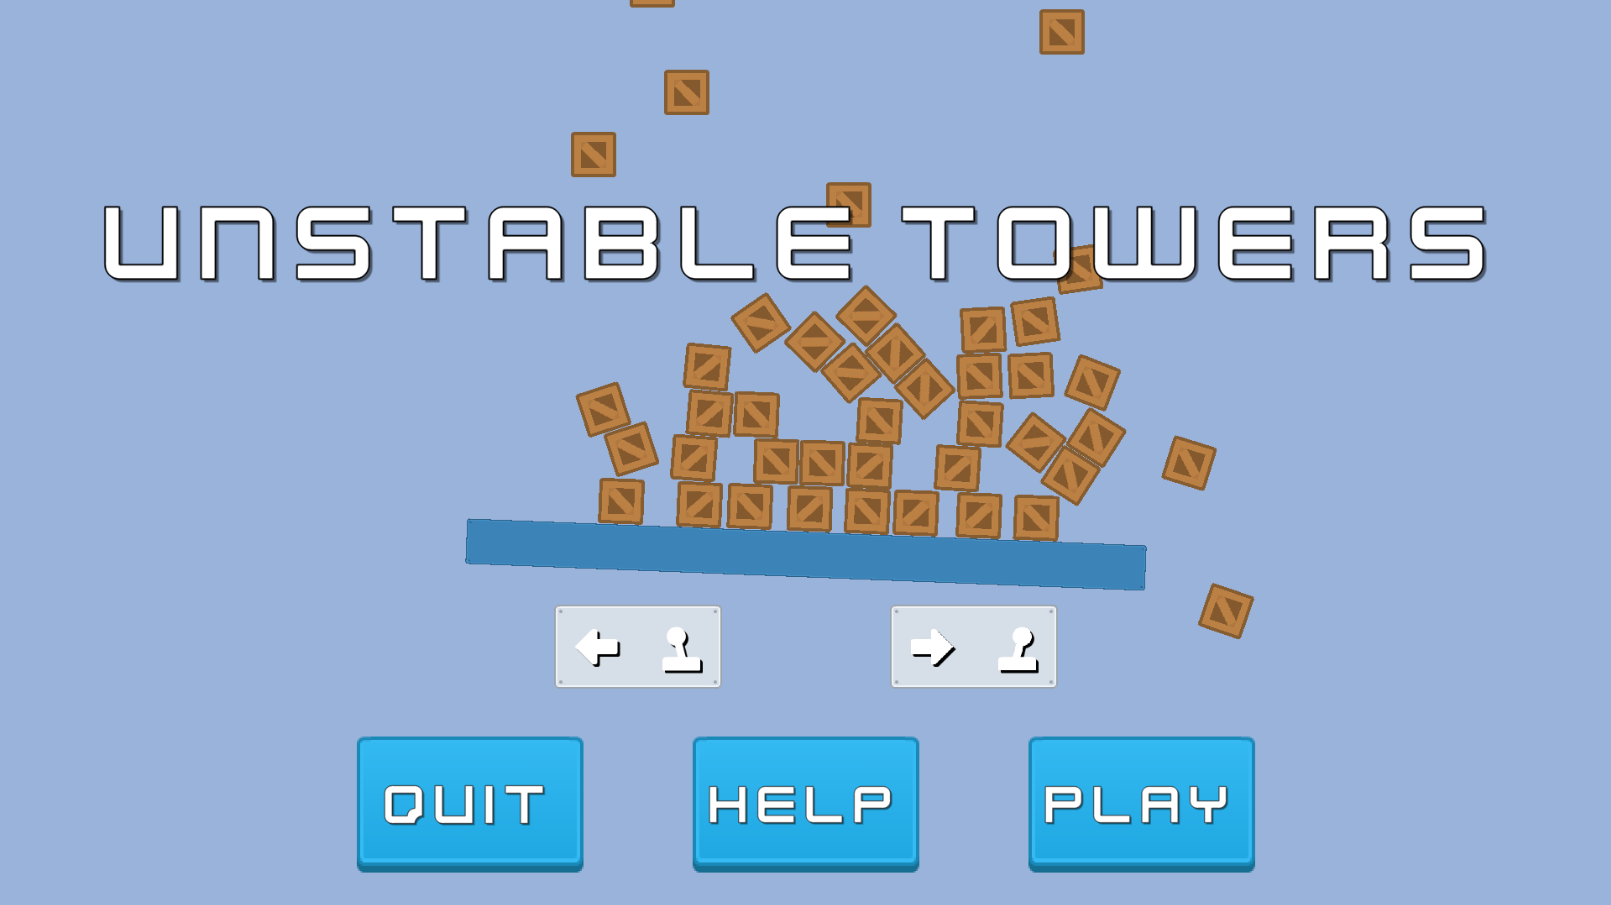 Unstable Towers